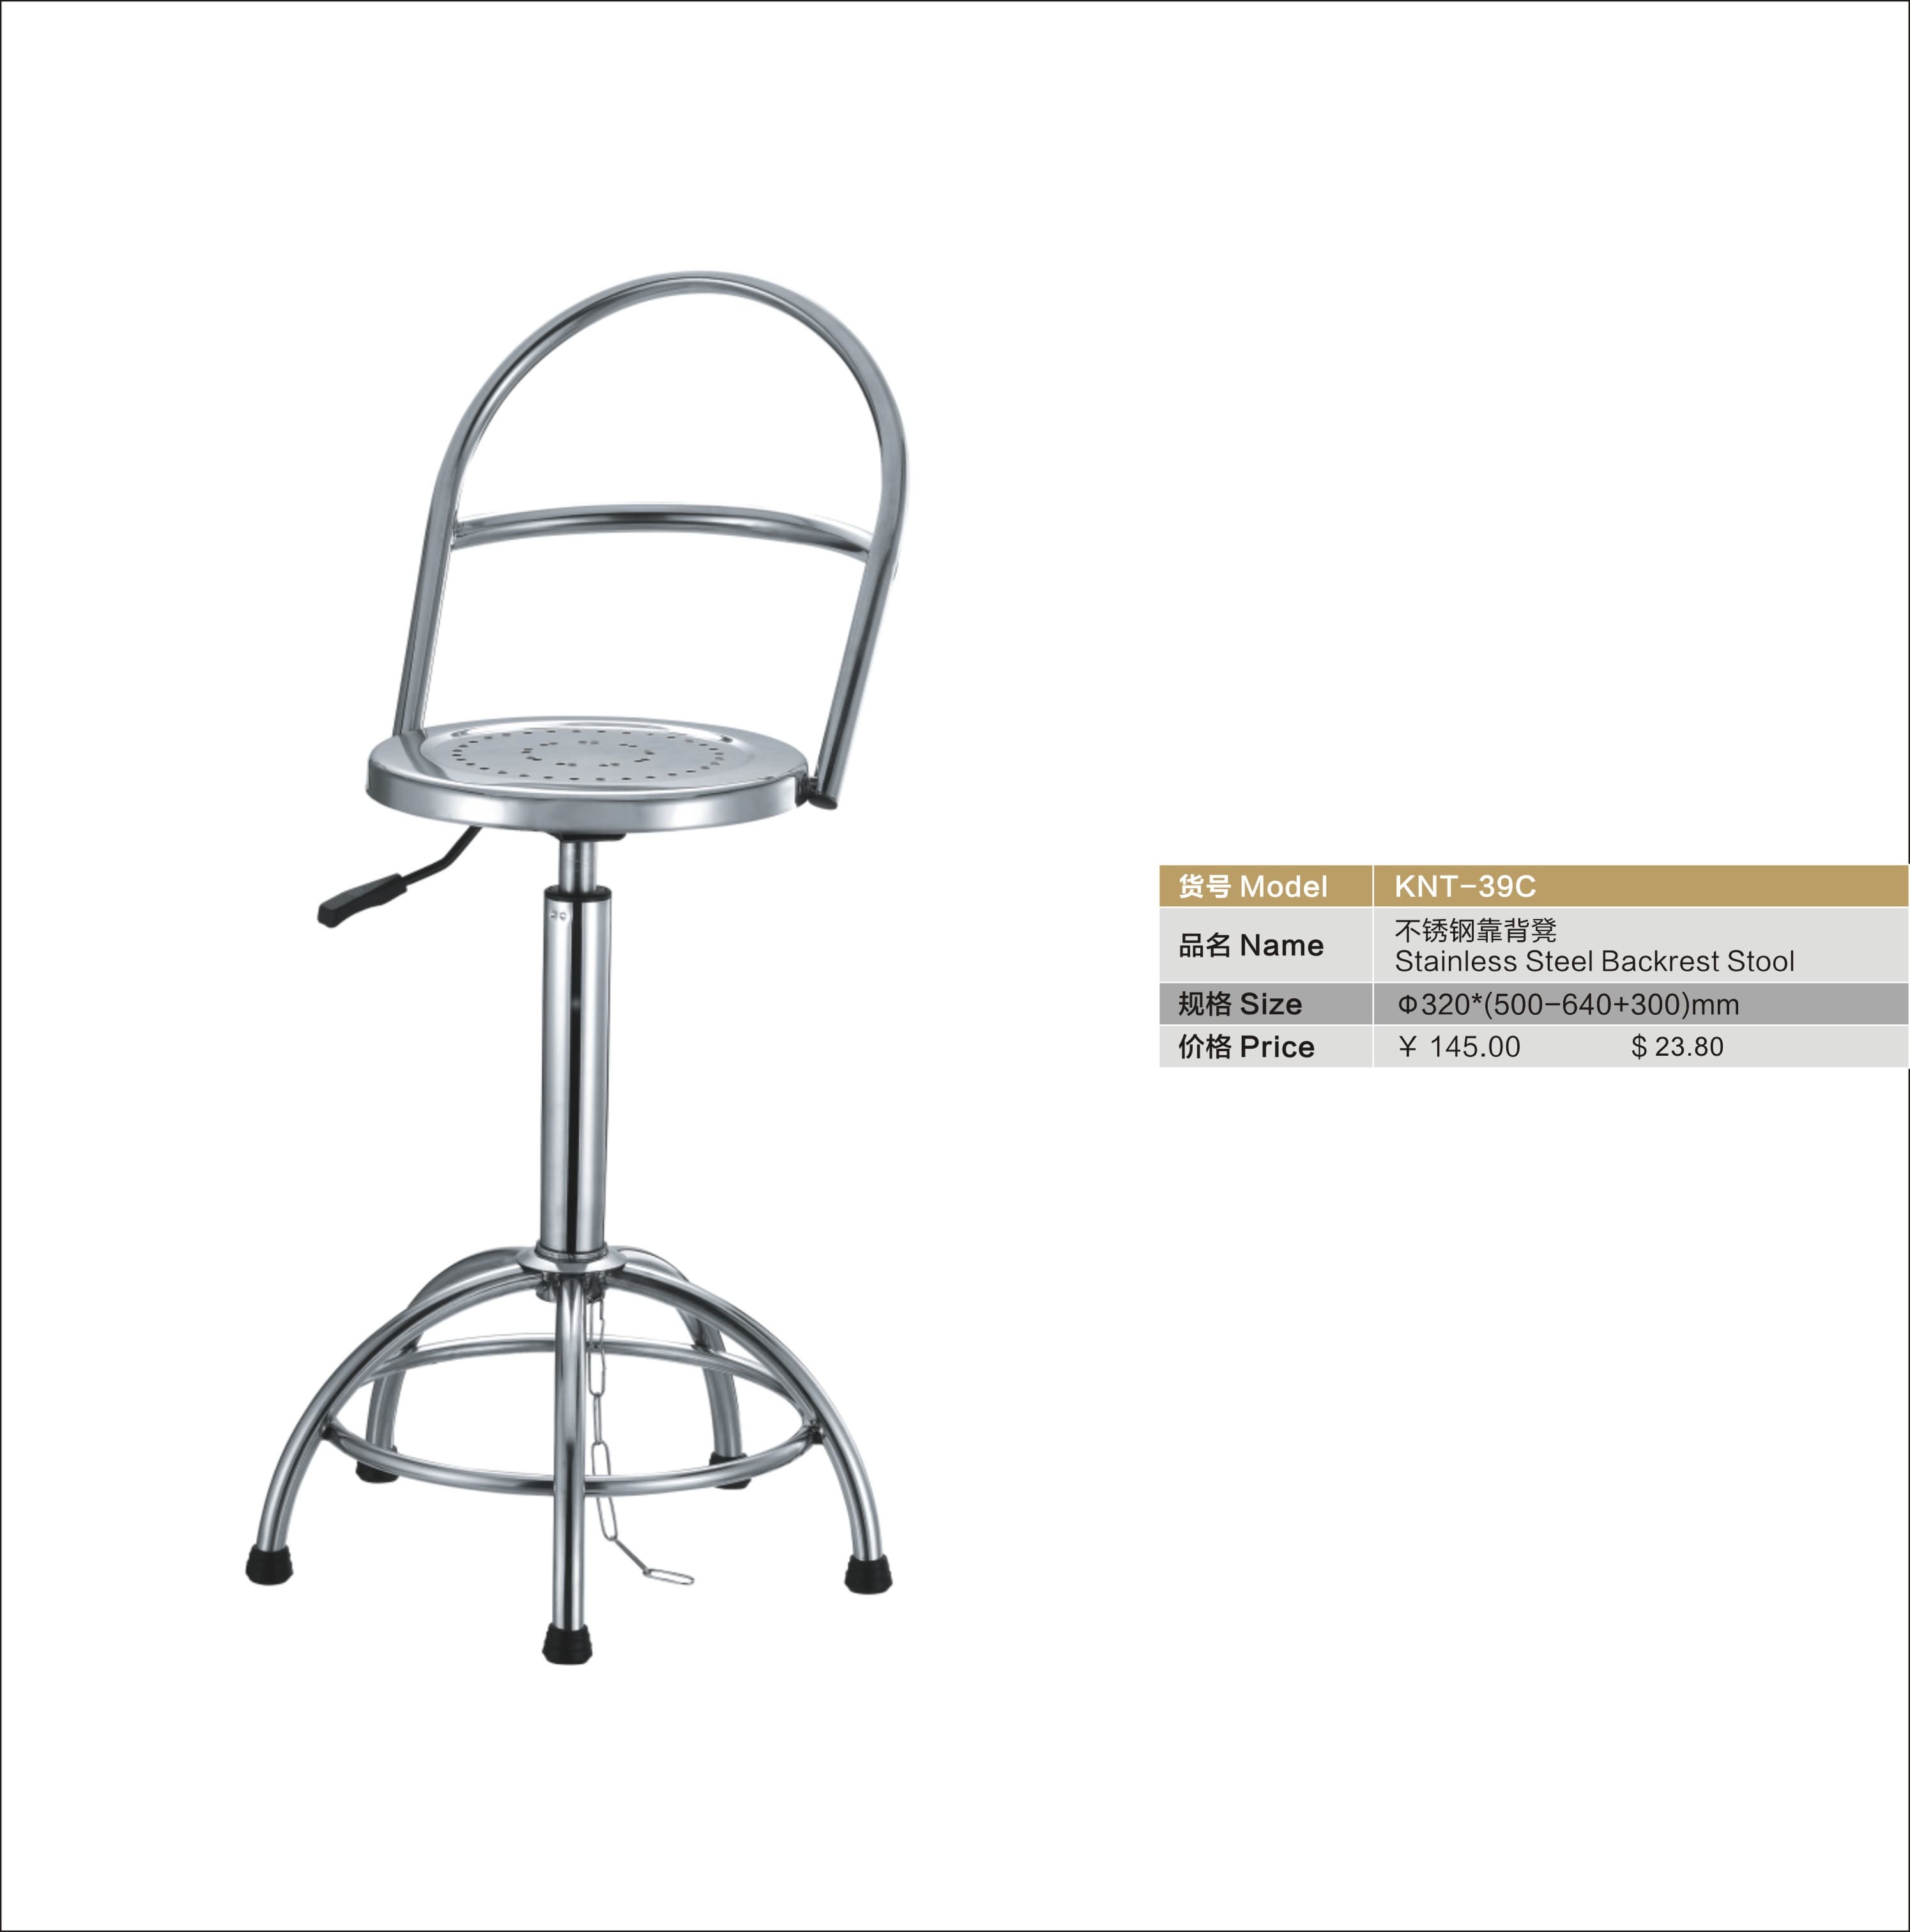 ventilation seating height adjustable chair